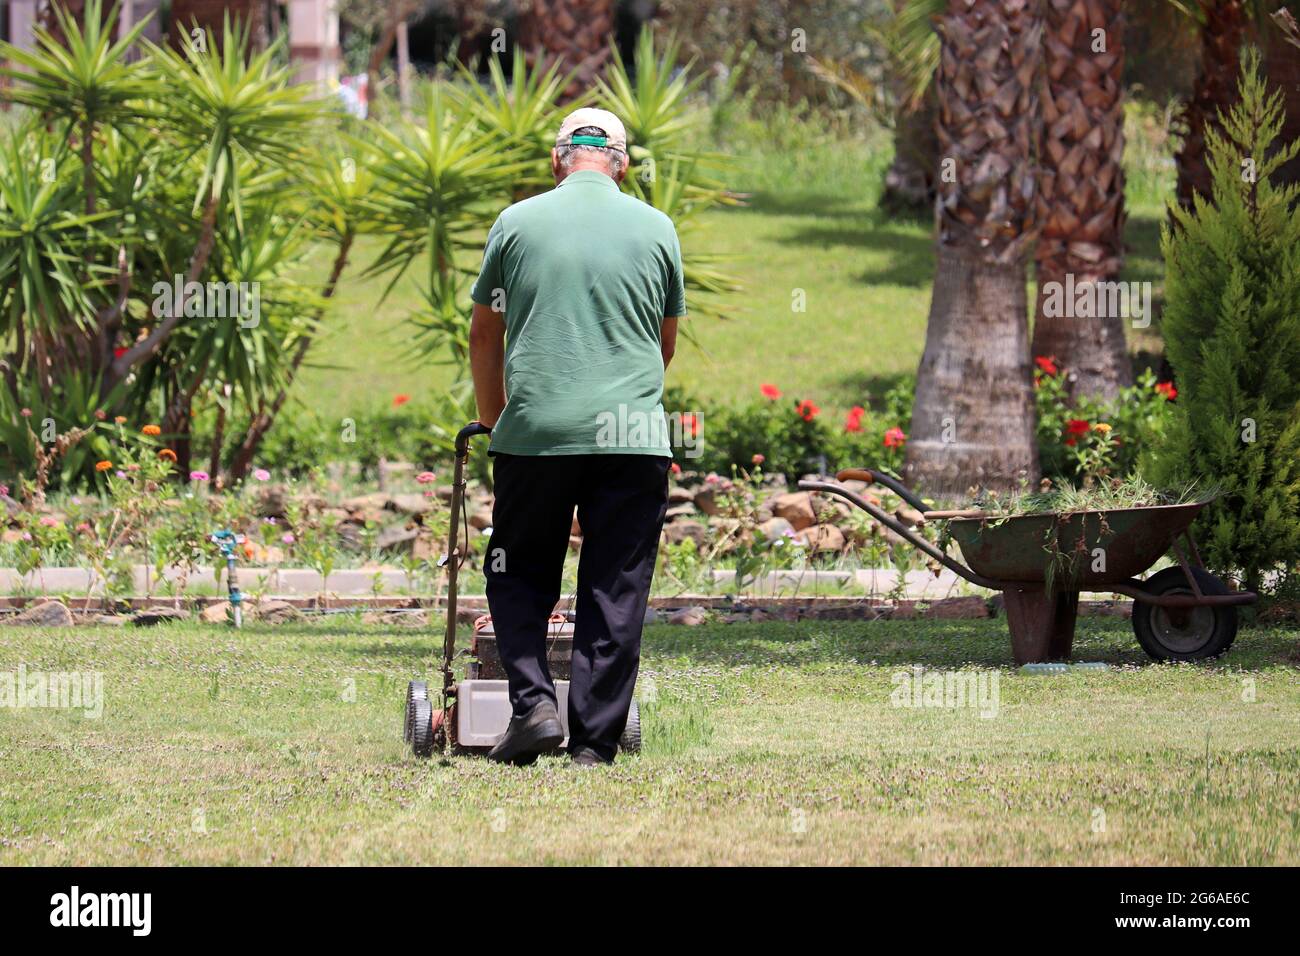 Gardener mowing the grass with lawn mower in park with palm trees. Tropical park improvement in sunny day Stock Photo